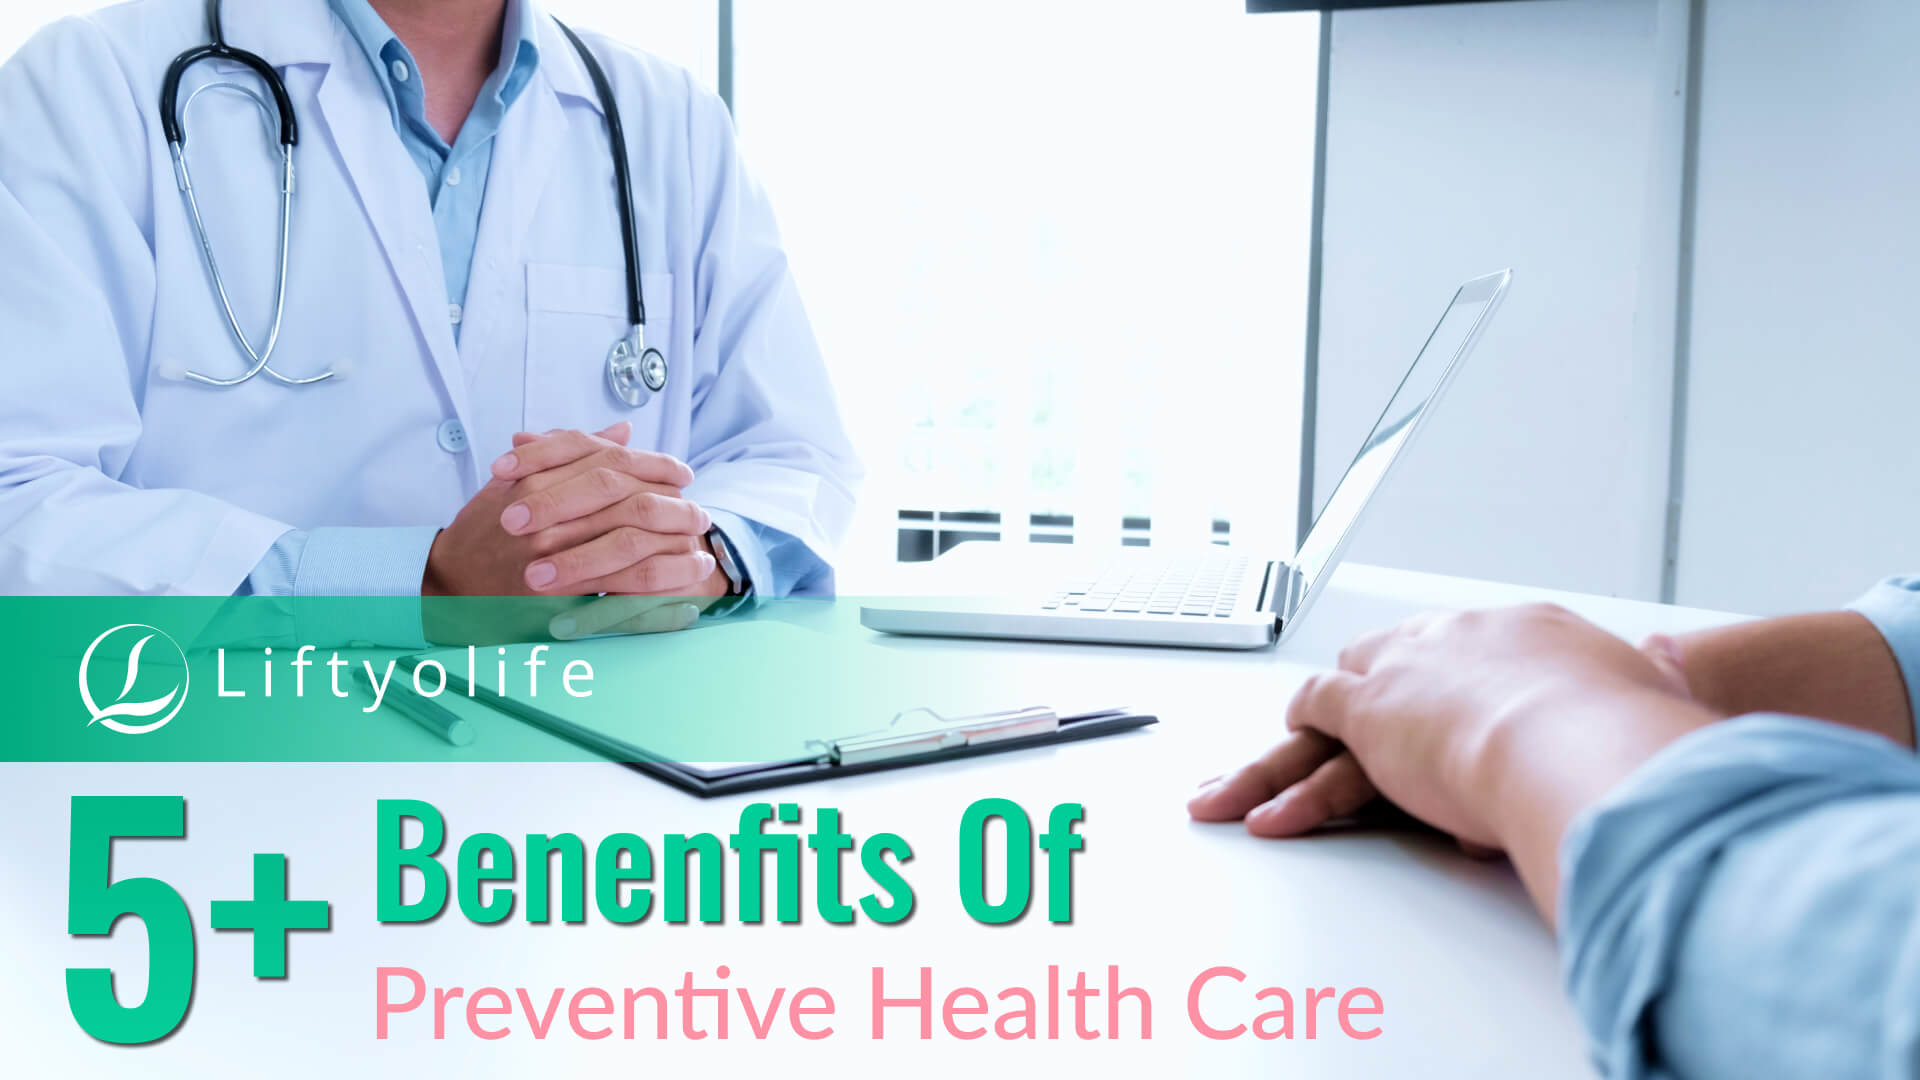 5 Benefits Of Preventive Health Care That Nobody Told You